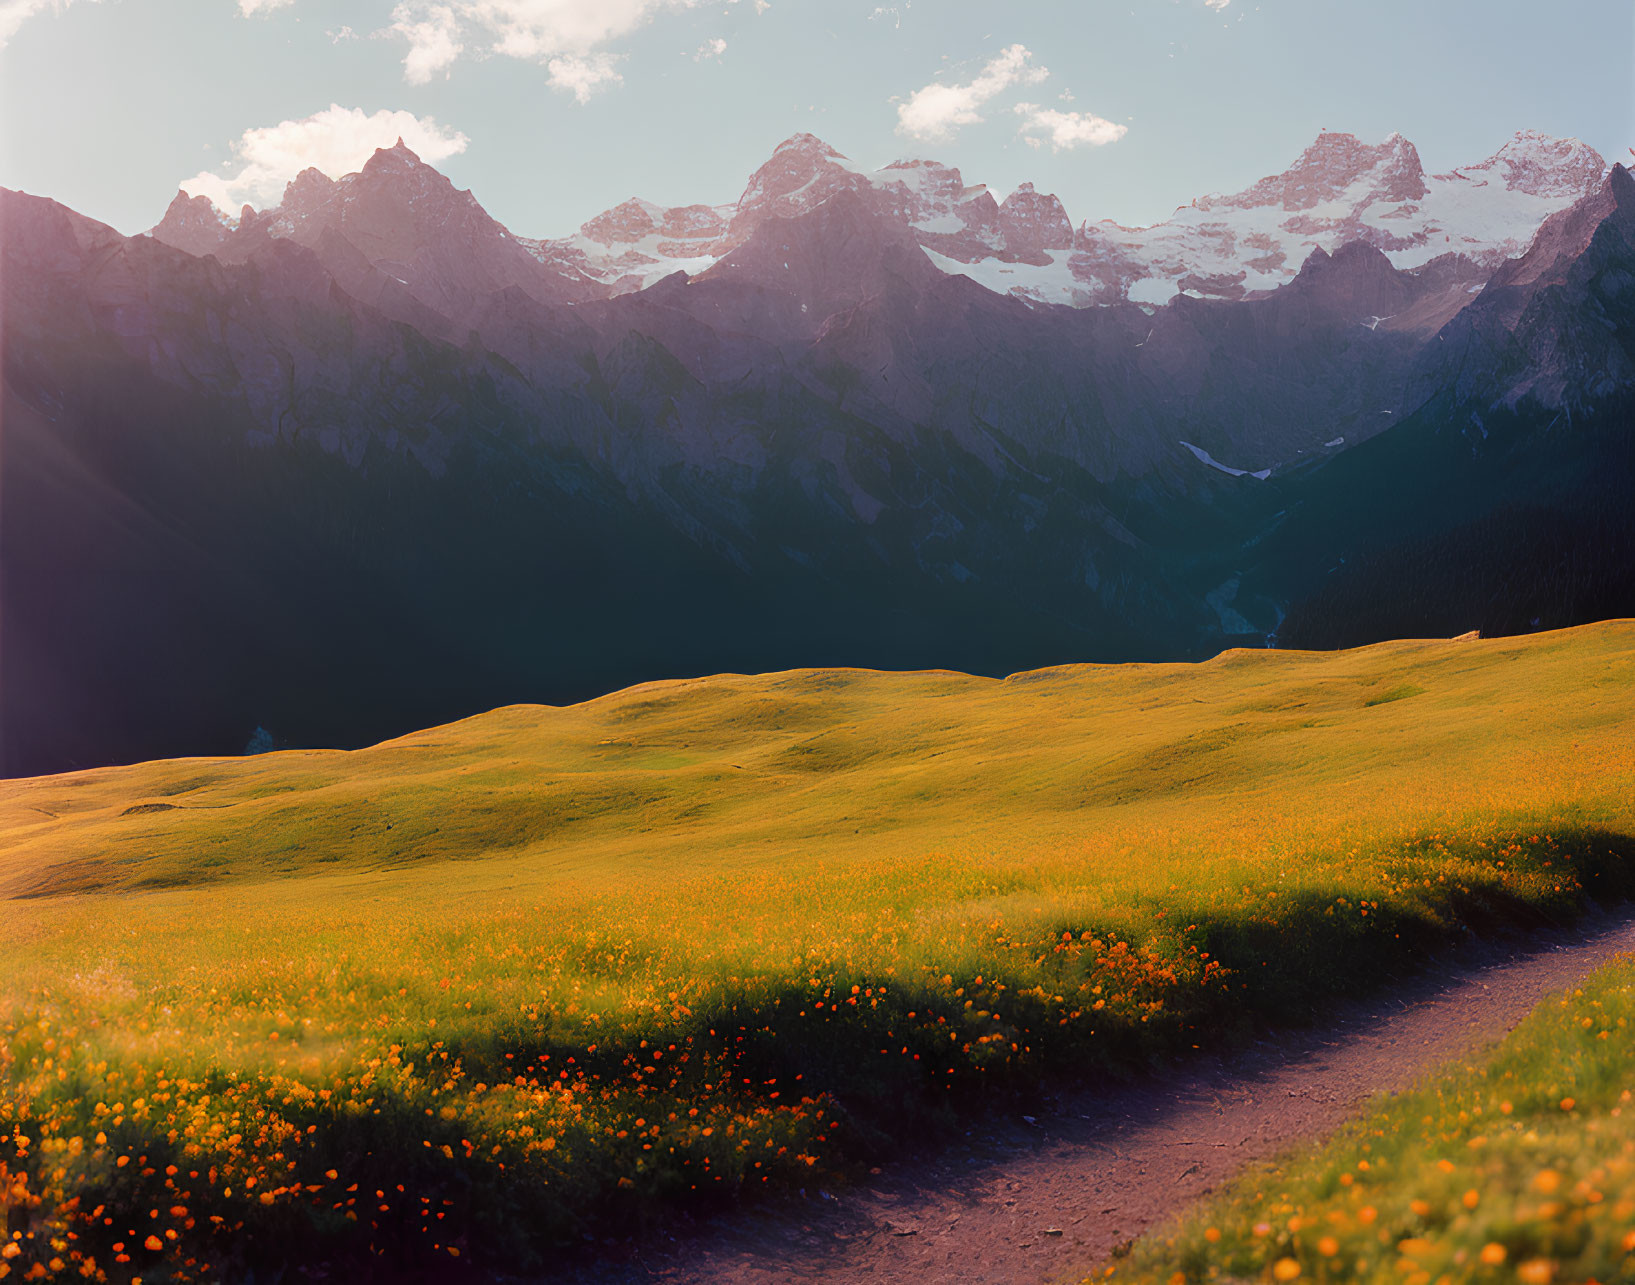 Scenic flower-filled meadow with snowy mountains in the background